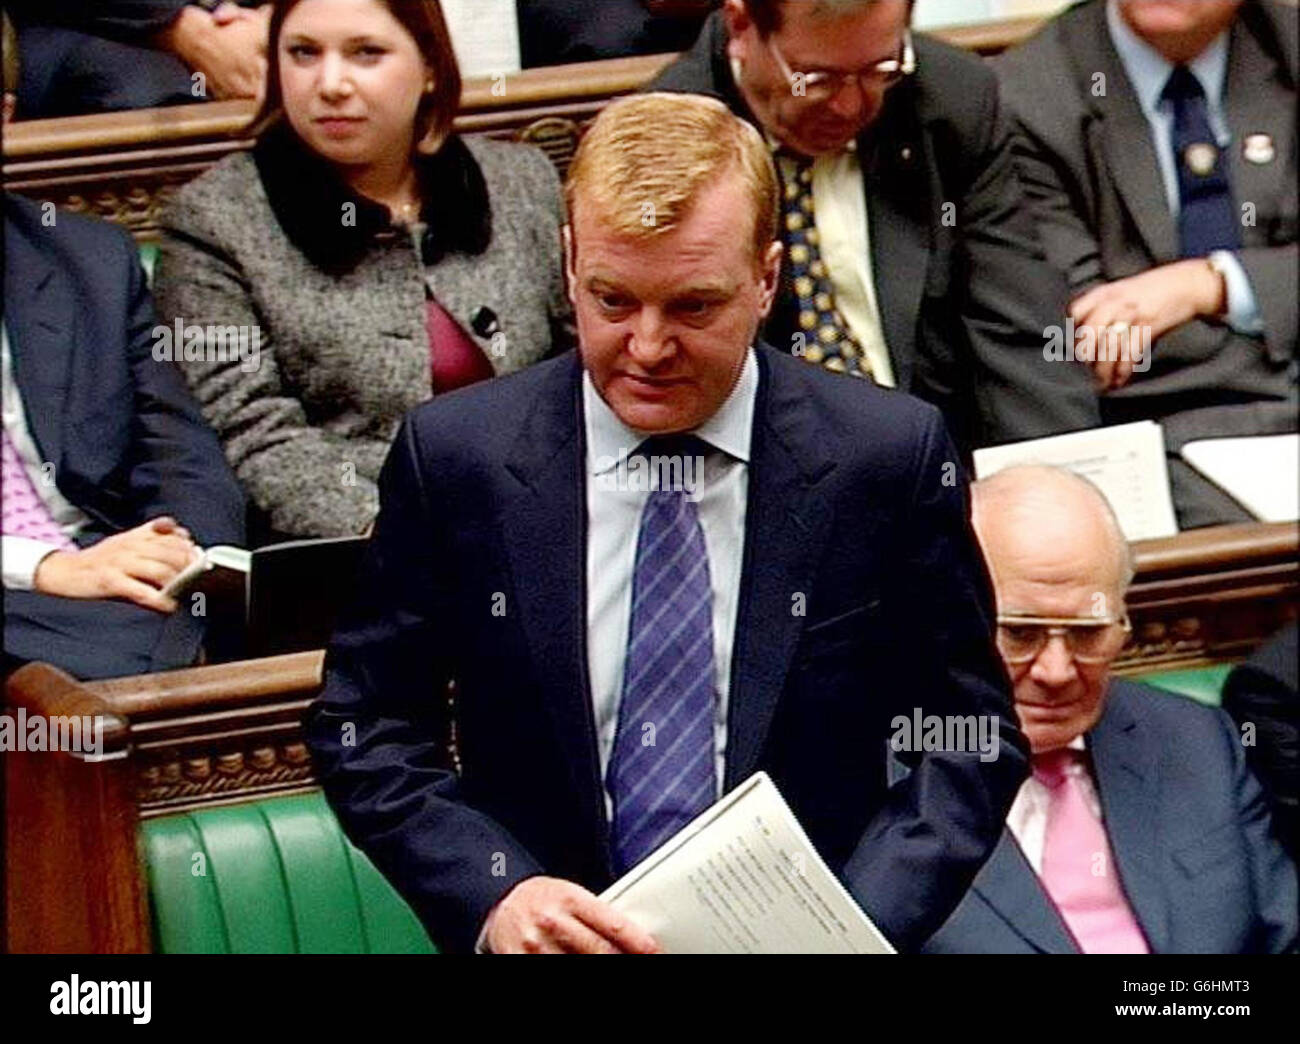 Video grab of the Liberal Democrat Leader Charles Kennedy, with the youngest MP in the House - Sarah Teather, 29 - behind him, speaking at the House of Commons, London, during Prime Ministers Questions. Stock Photo